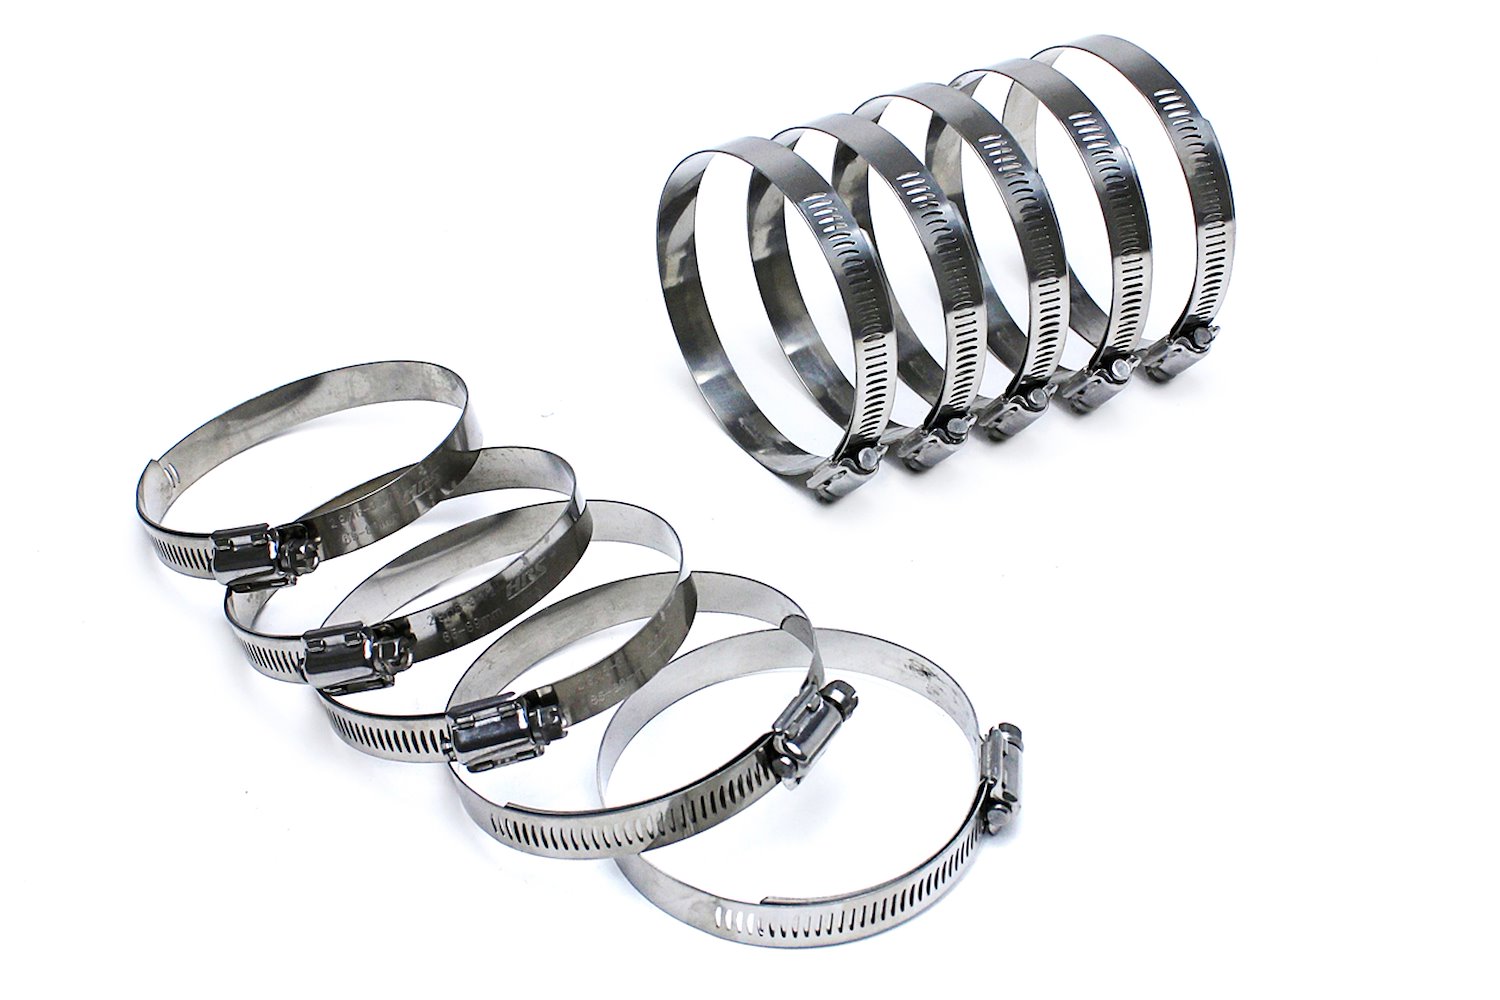 SSWC-78-102x10 Stainless Steel Worm Gear Hose Clamp, Effective Range: 3-1/16 in.- 4 in., 10Pc